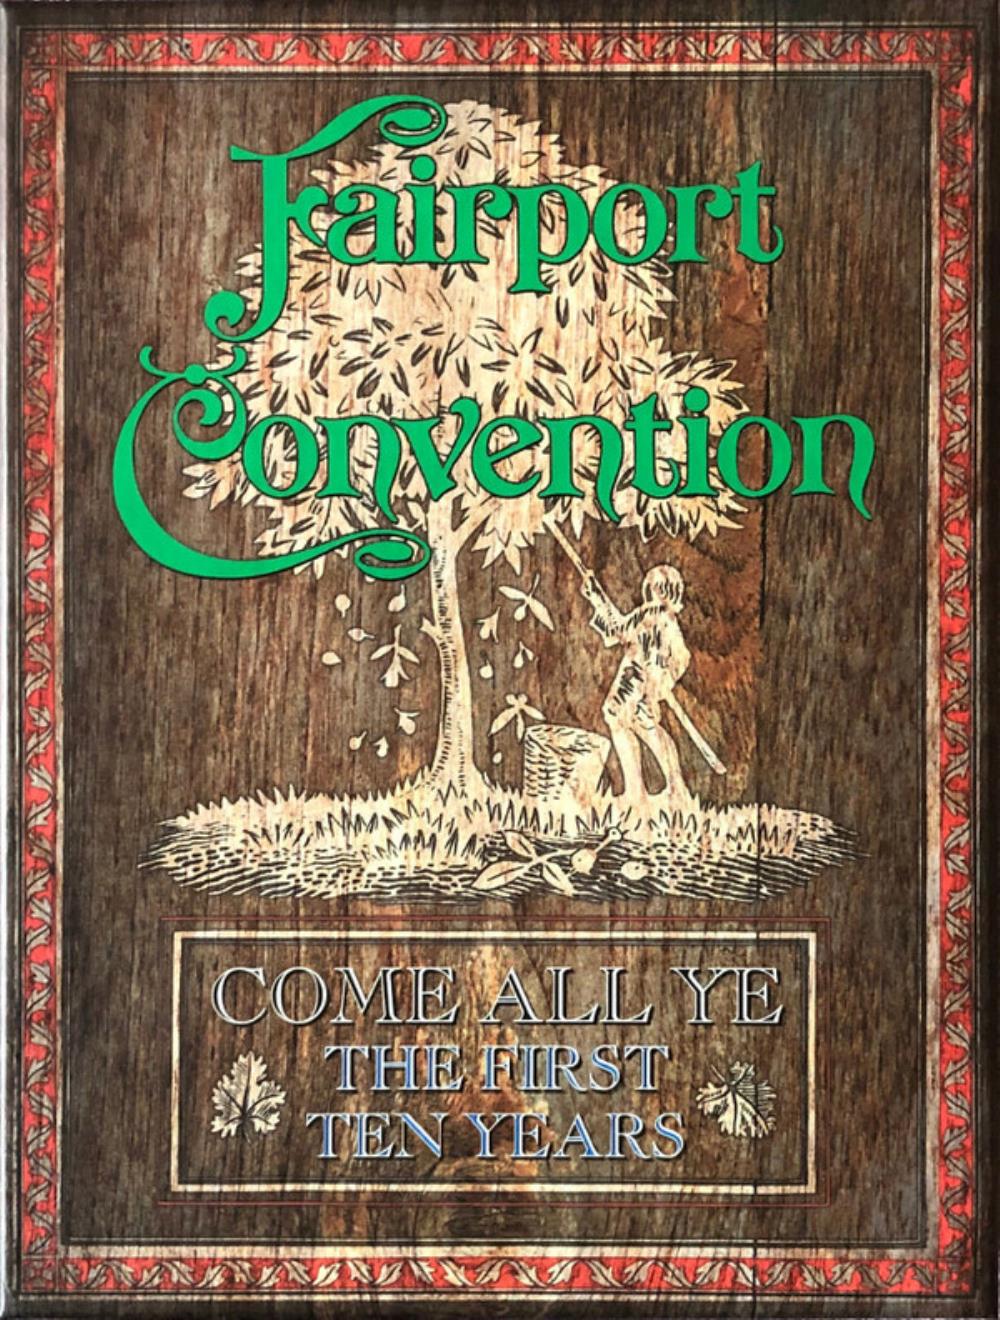 Fairport Convention Come All Ye: The First Ten Years album cover